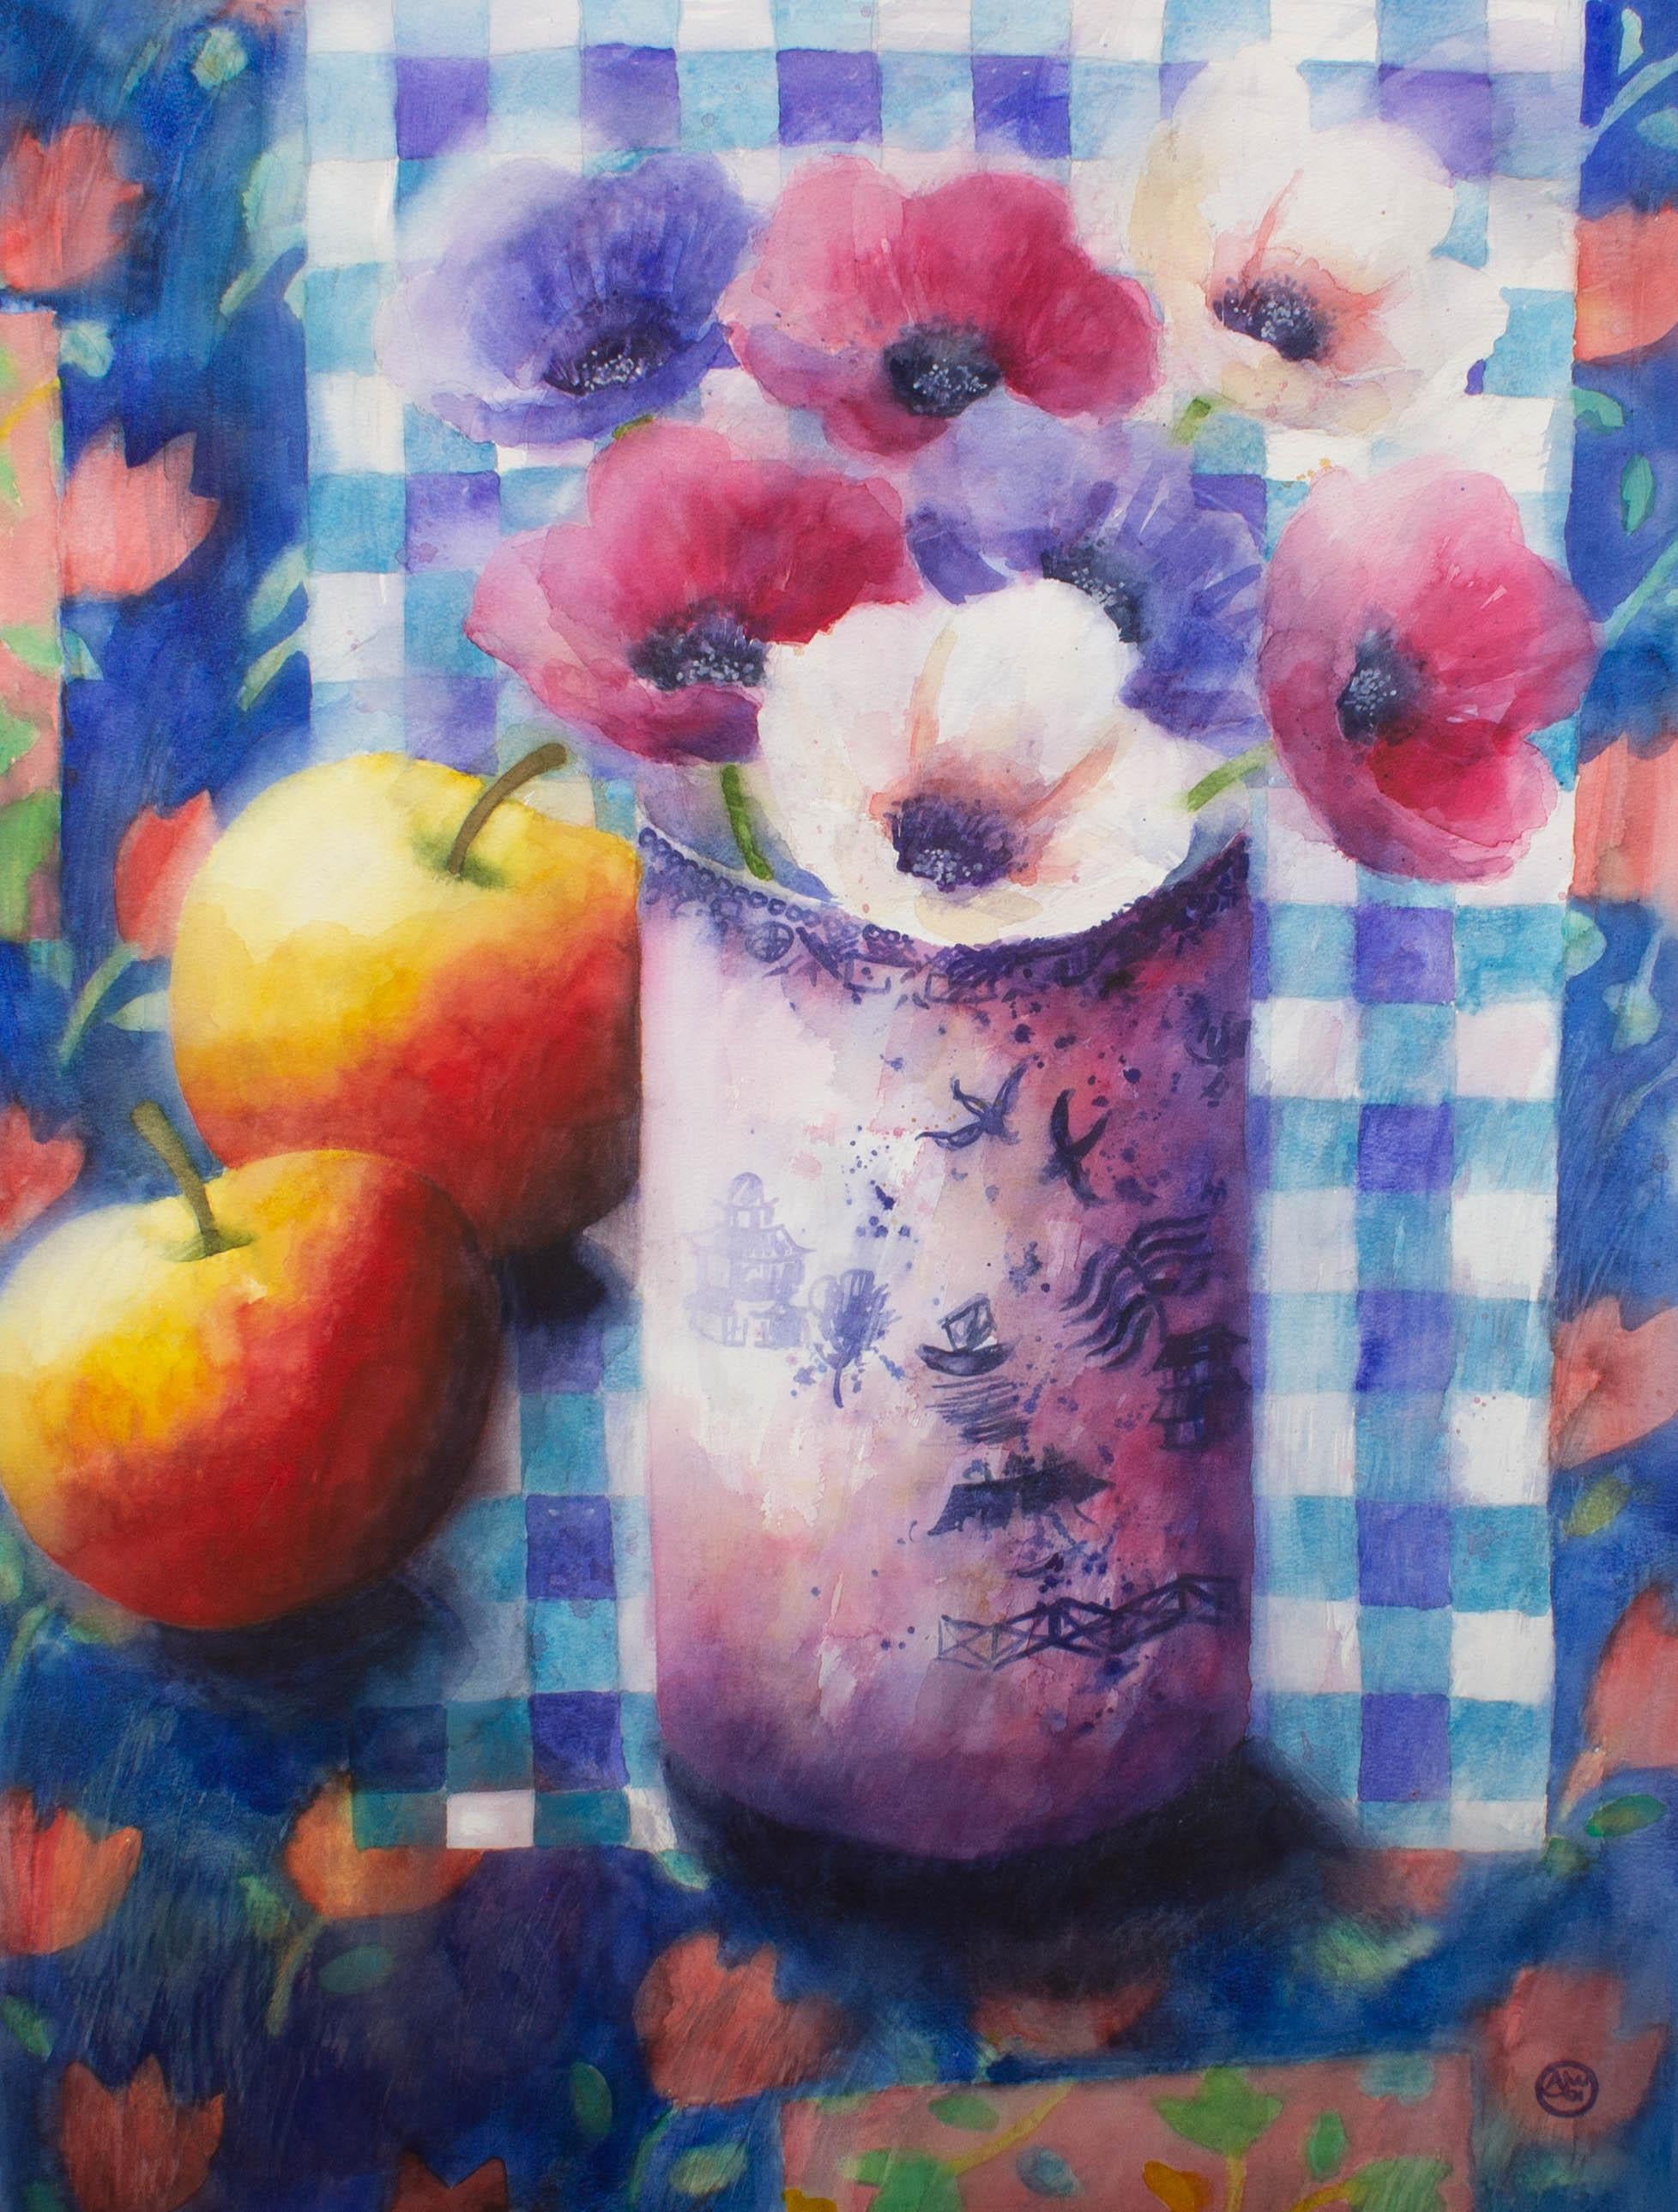 A.J.W - 2001 Watercolour, Anemones And Apples 1